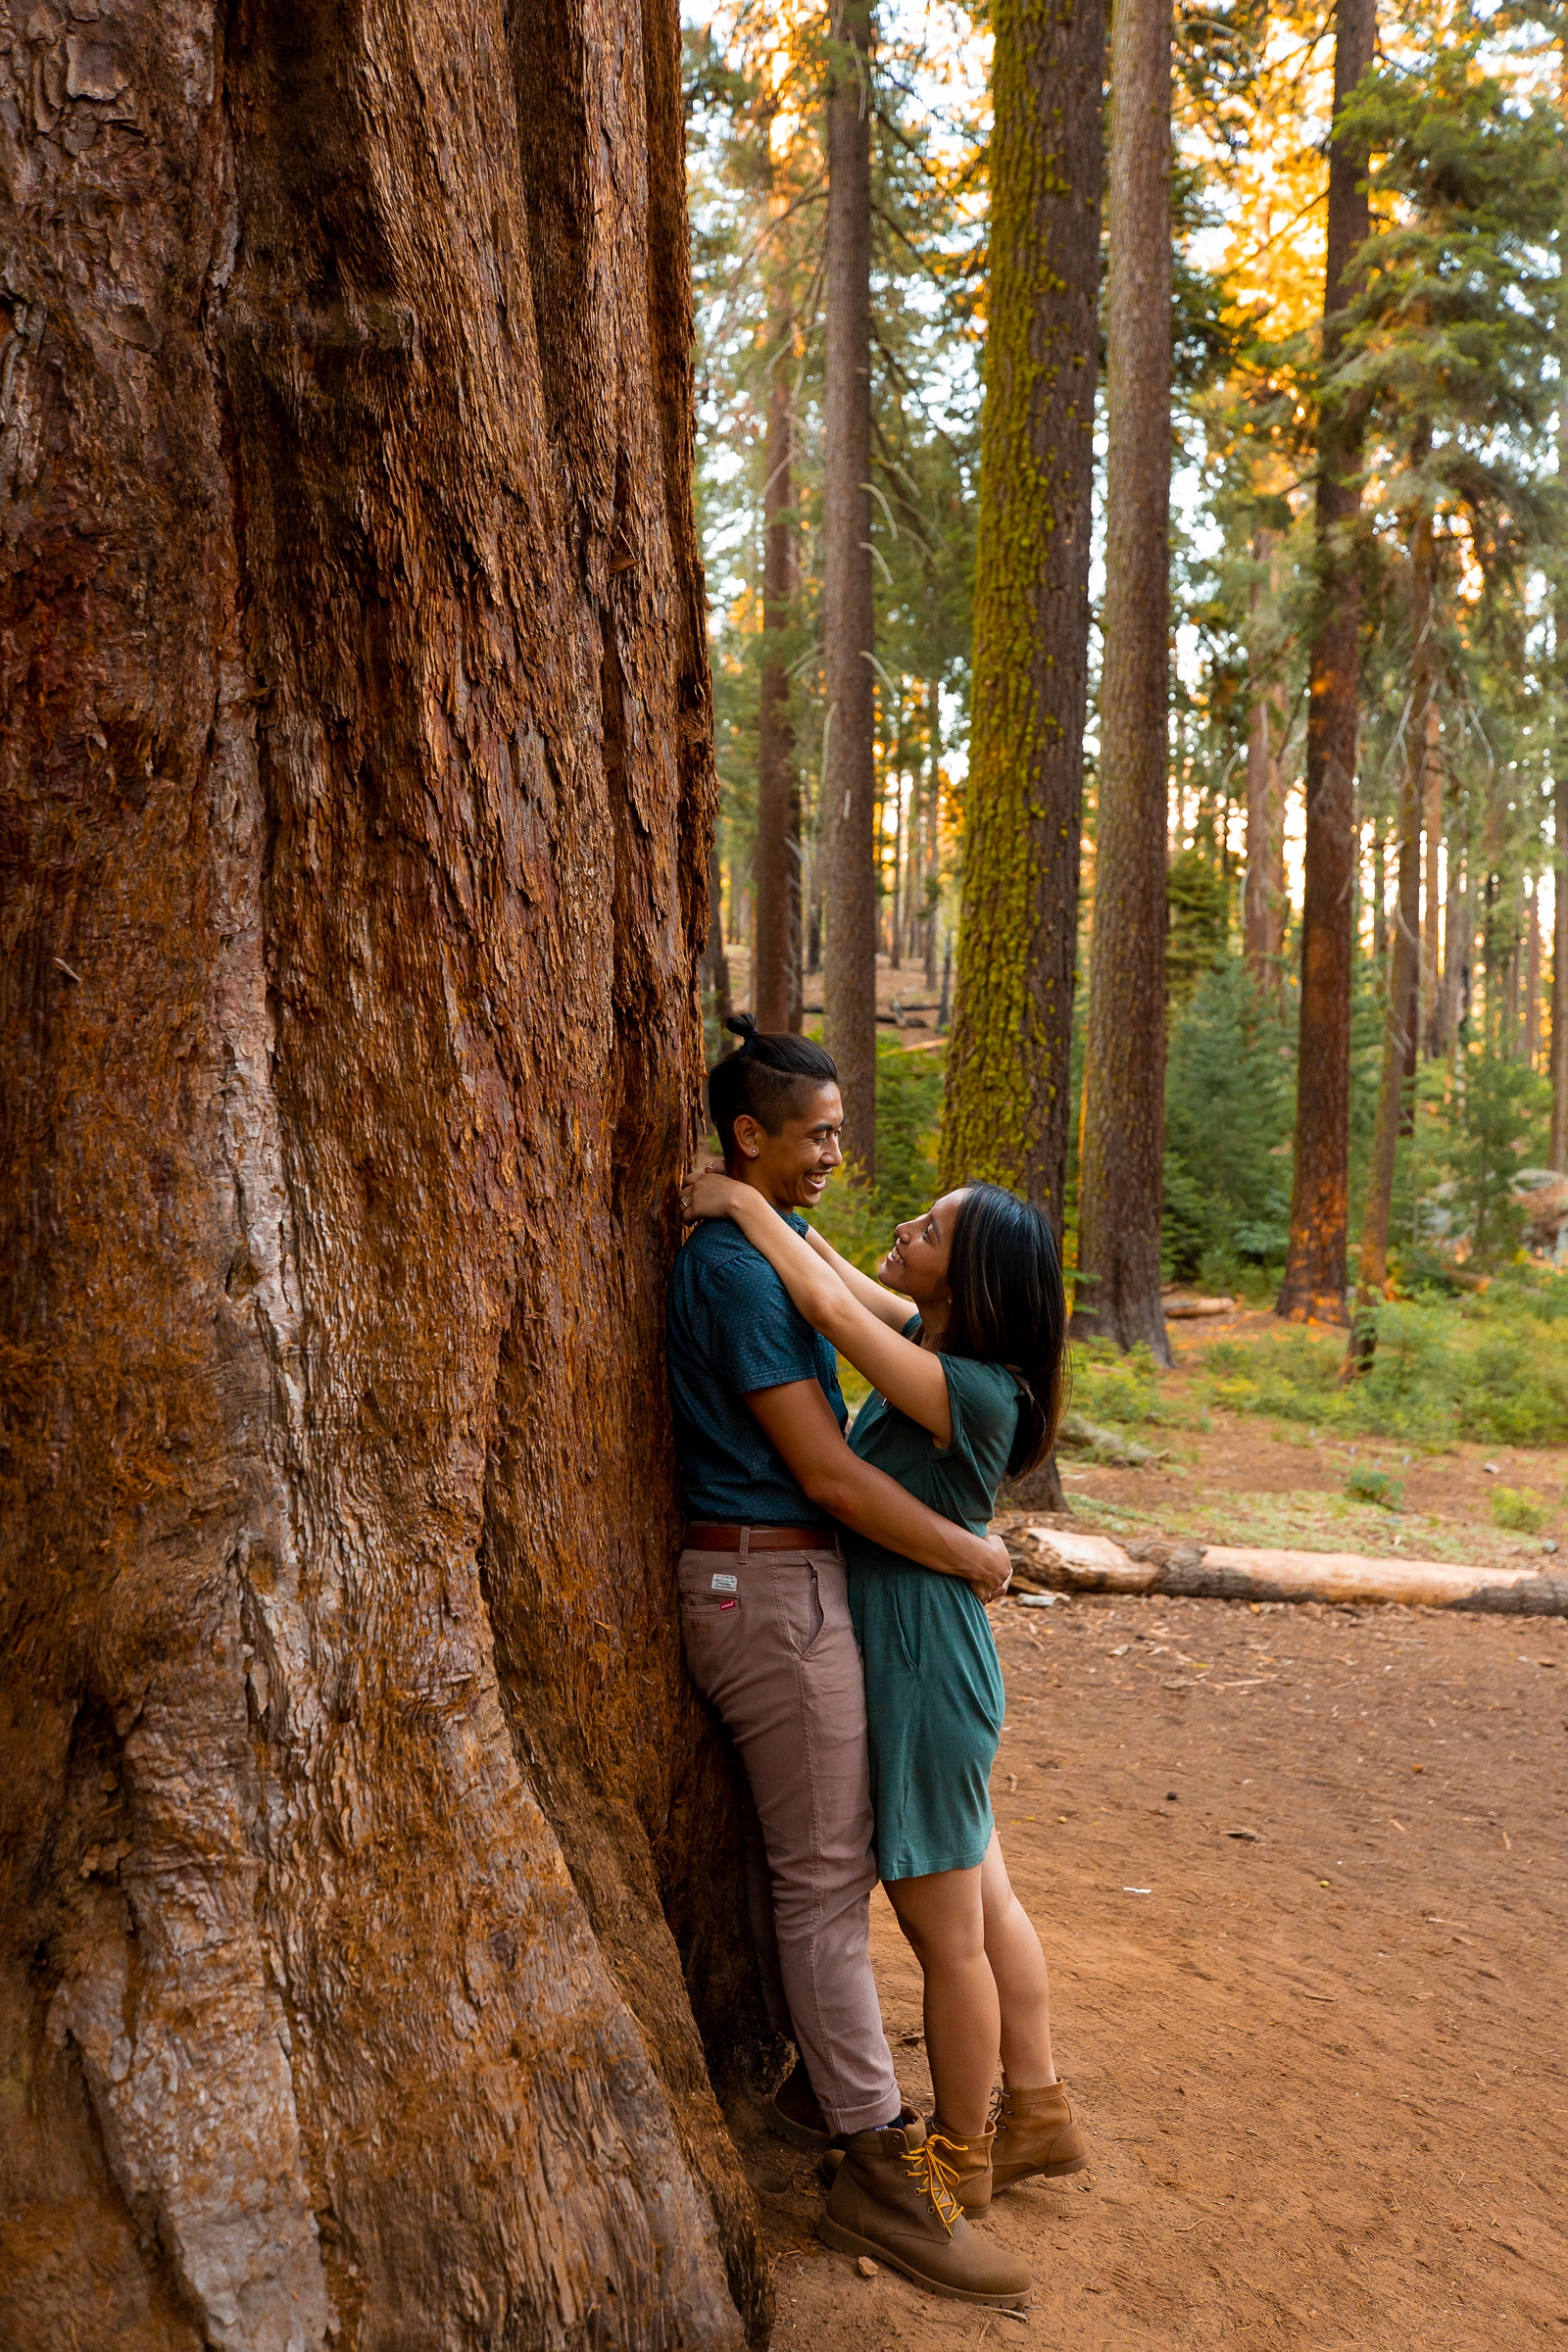 This couple got engaged in Sequoia National Park.